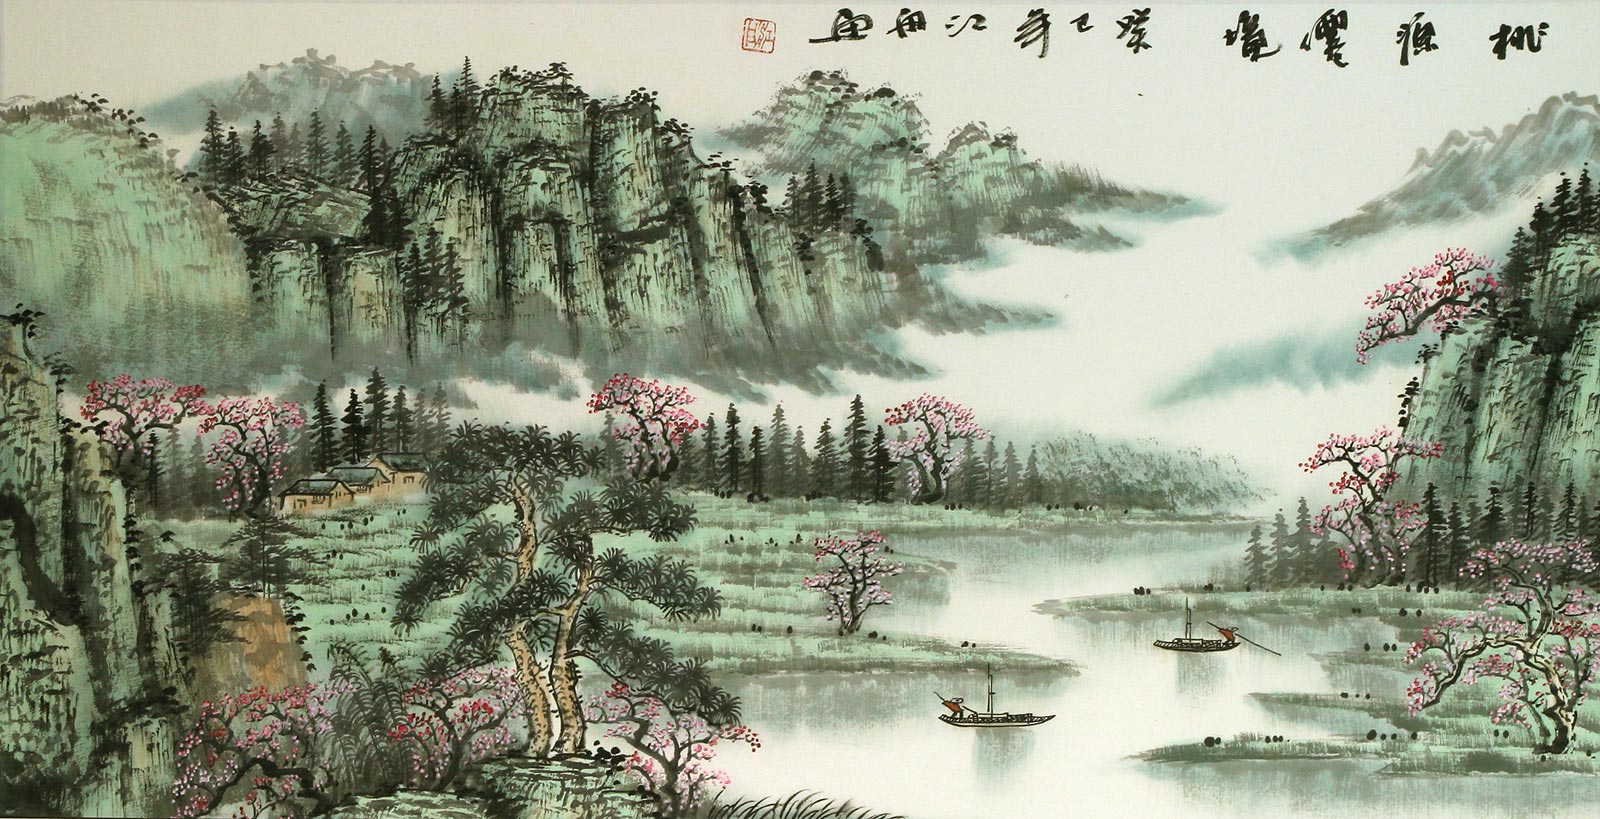 Silence of Spring Rain - Chinese River Village Landscape